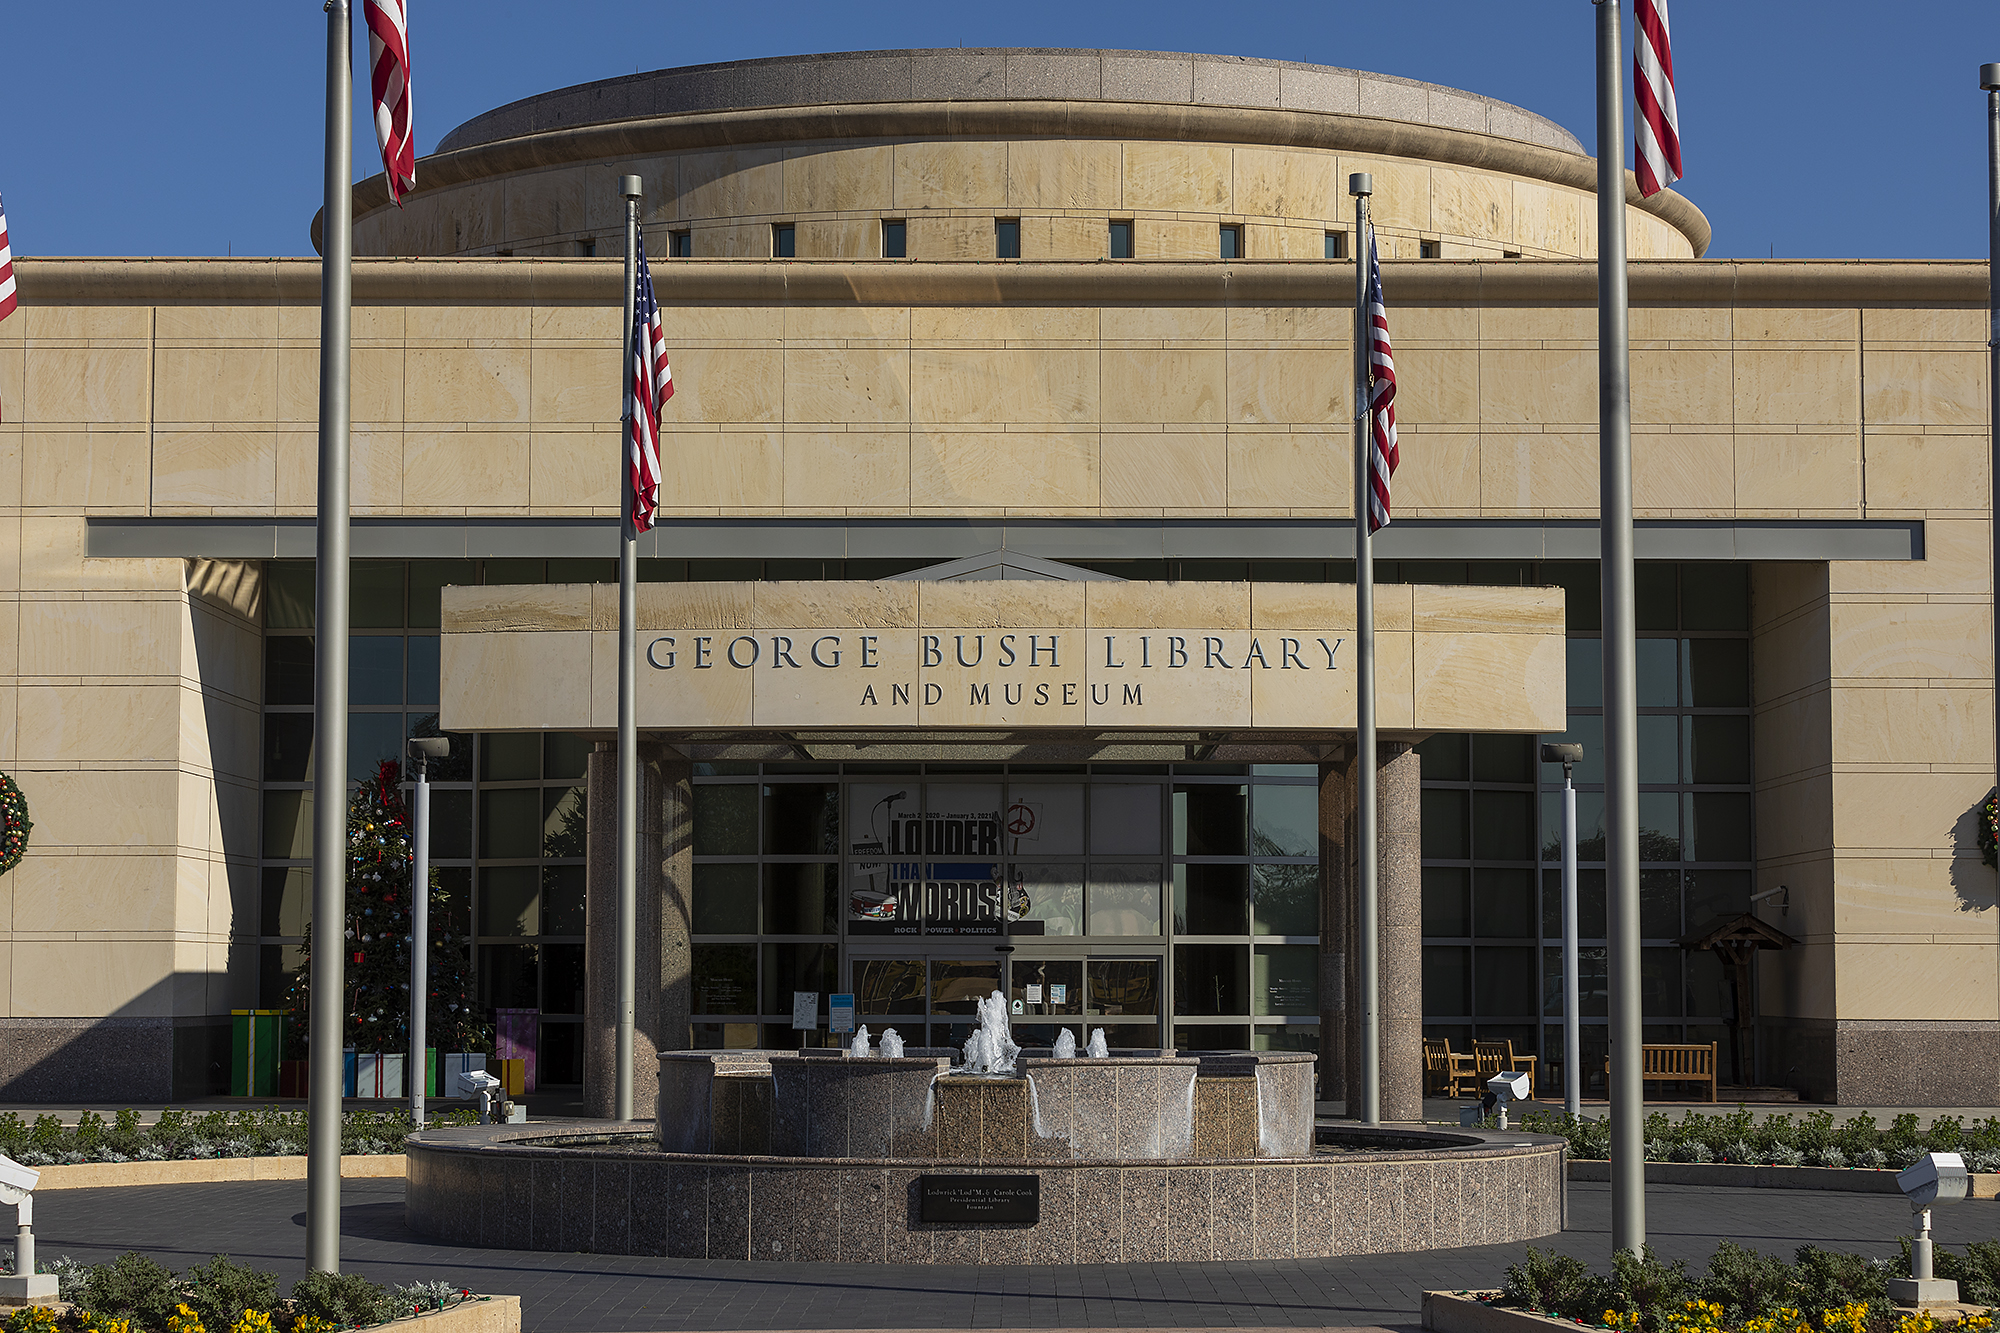 George Bush Library in College Station, TX